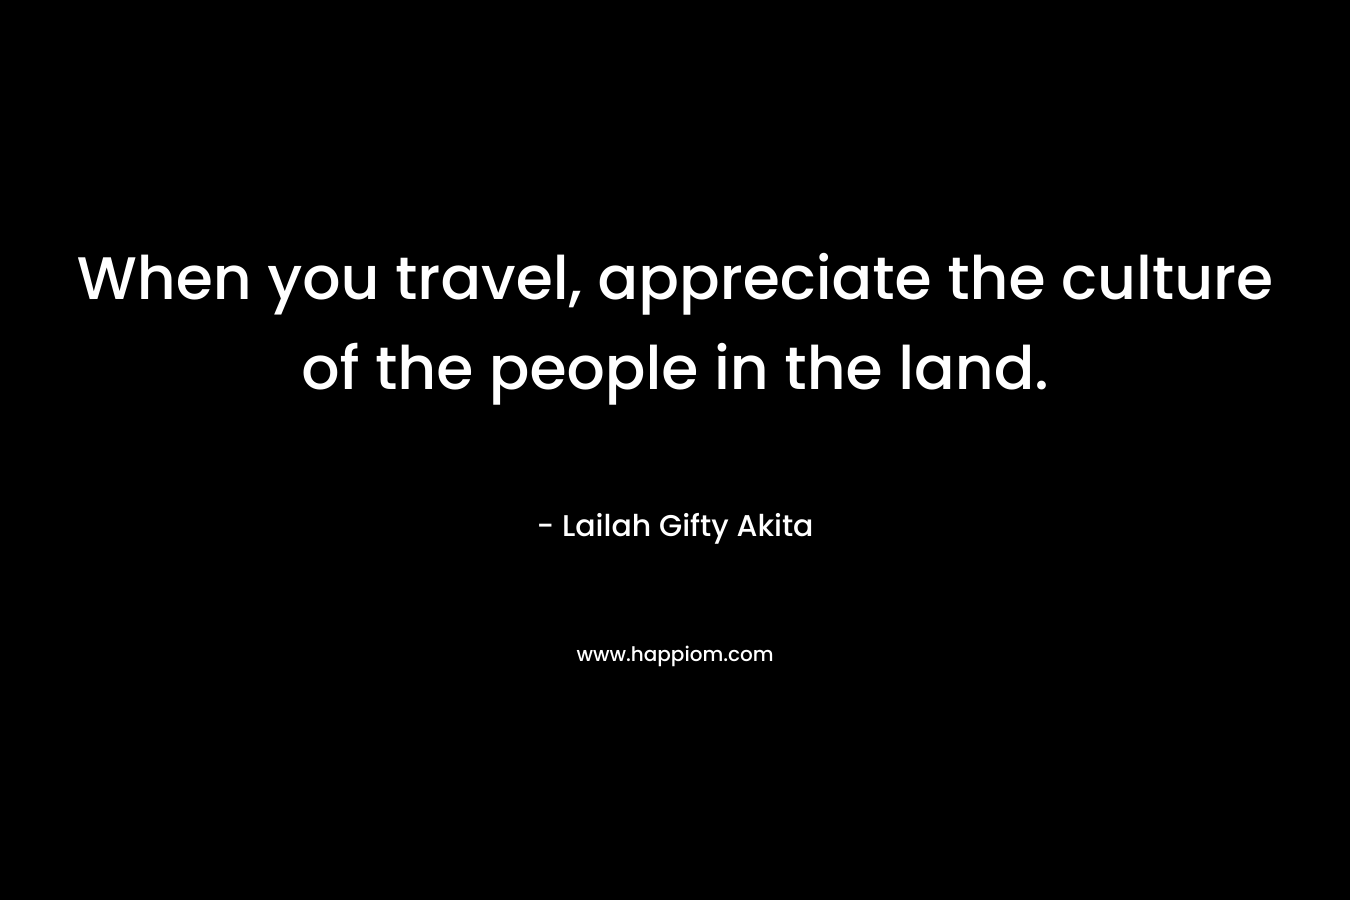 When you travel, appreciate the culture of the people in the land.